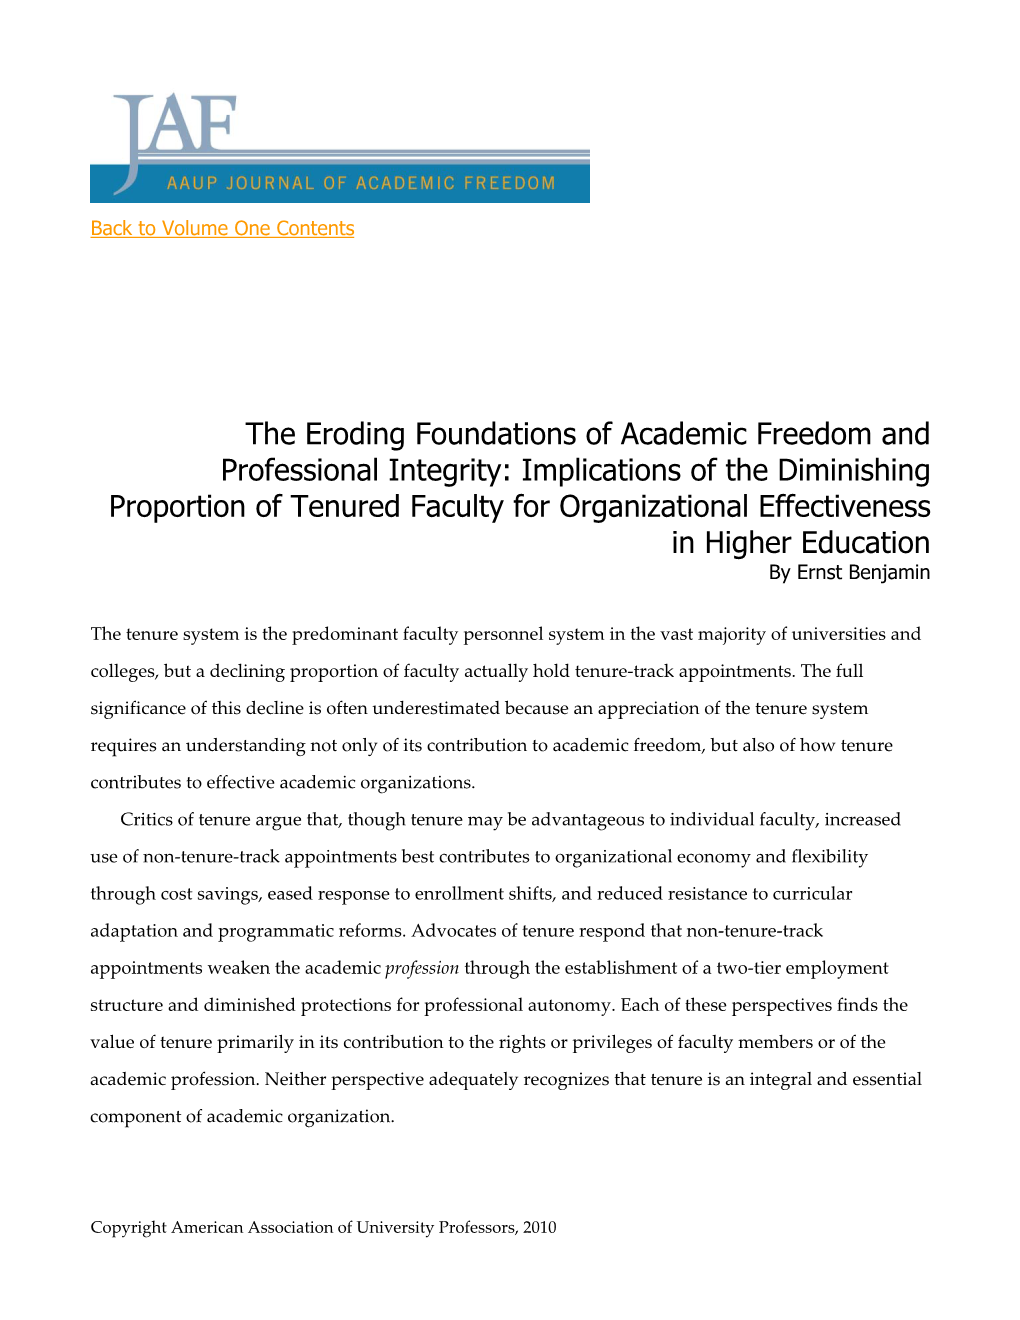 The Eroding Foundations of Academic Freedom and Professional Integrity